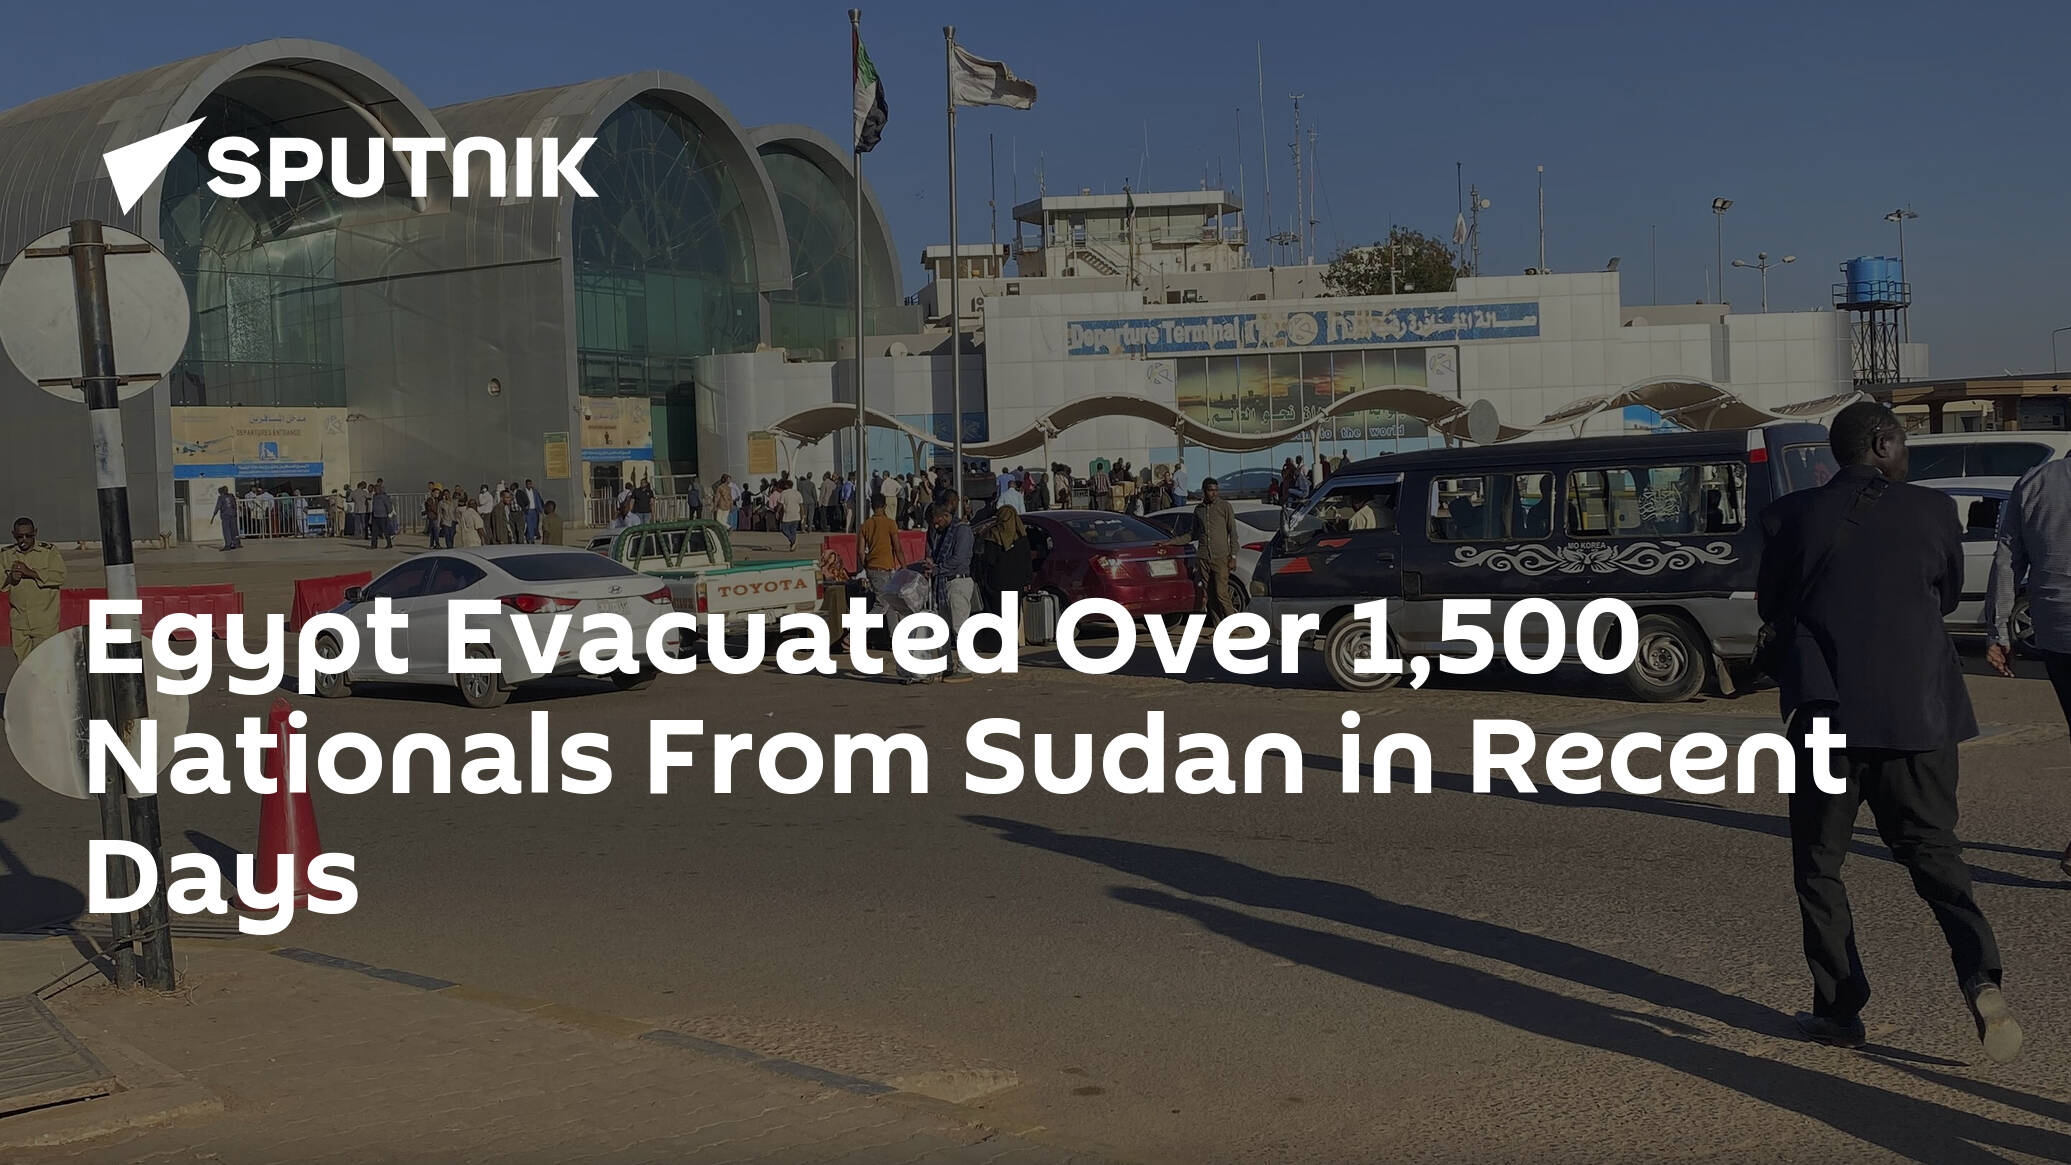 Egypt Evacuated Over 1,500 Nationals From Sudan in Recent Days – Foreign Ministry